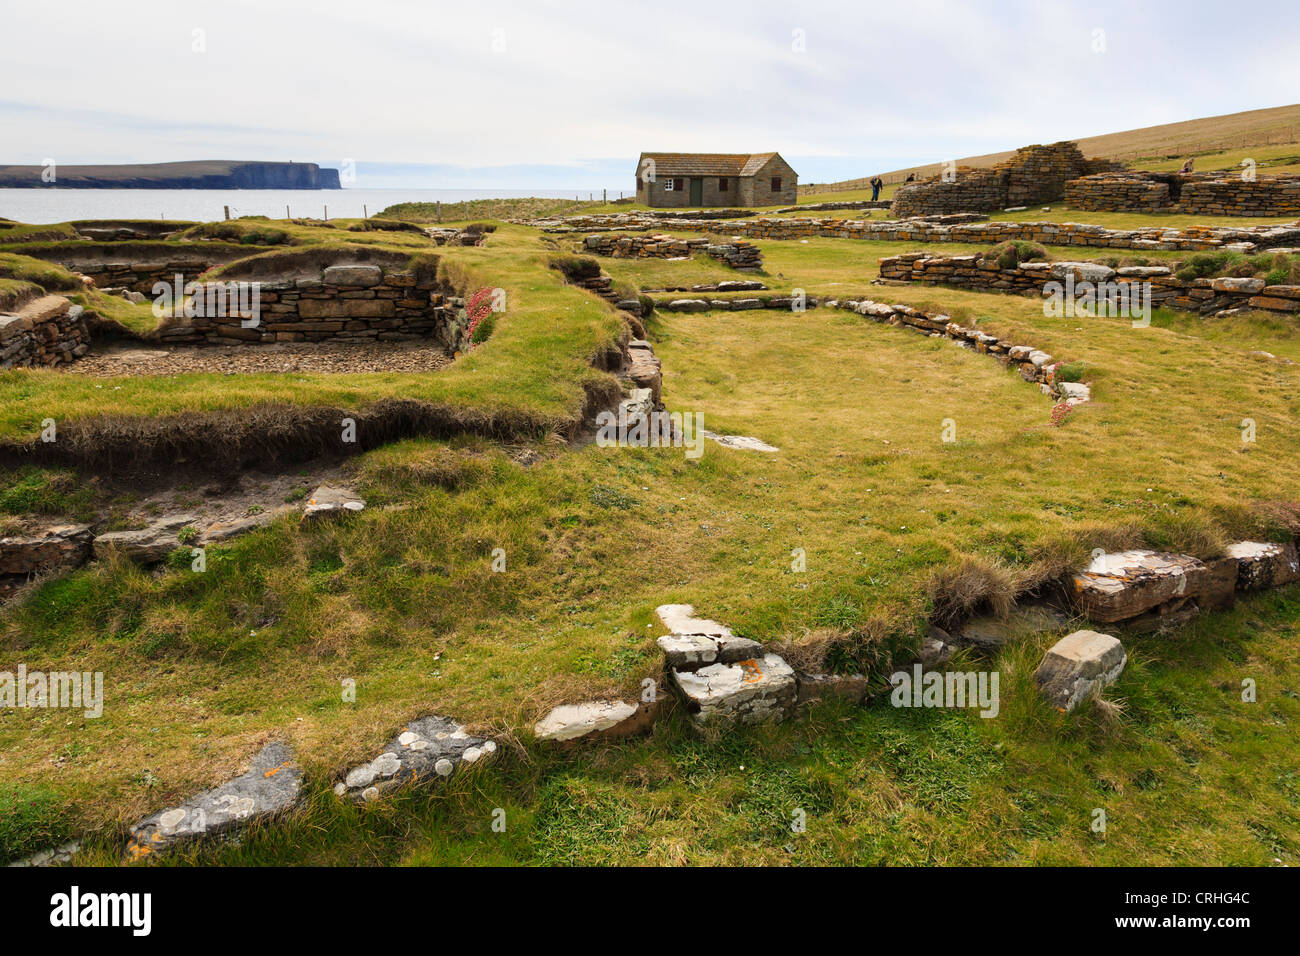 Remains of Norse long houses in a 10th century settlement excavated on the Brough of Birsay Orkney Islands Scotland UK Britain Stock Photo